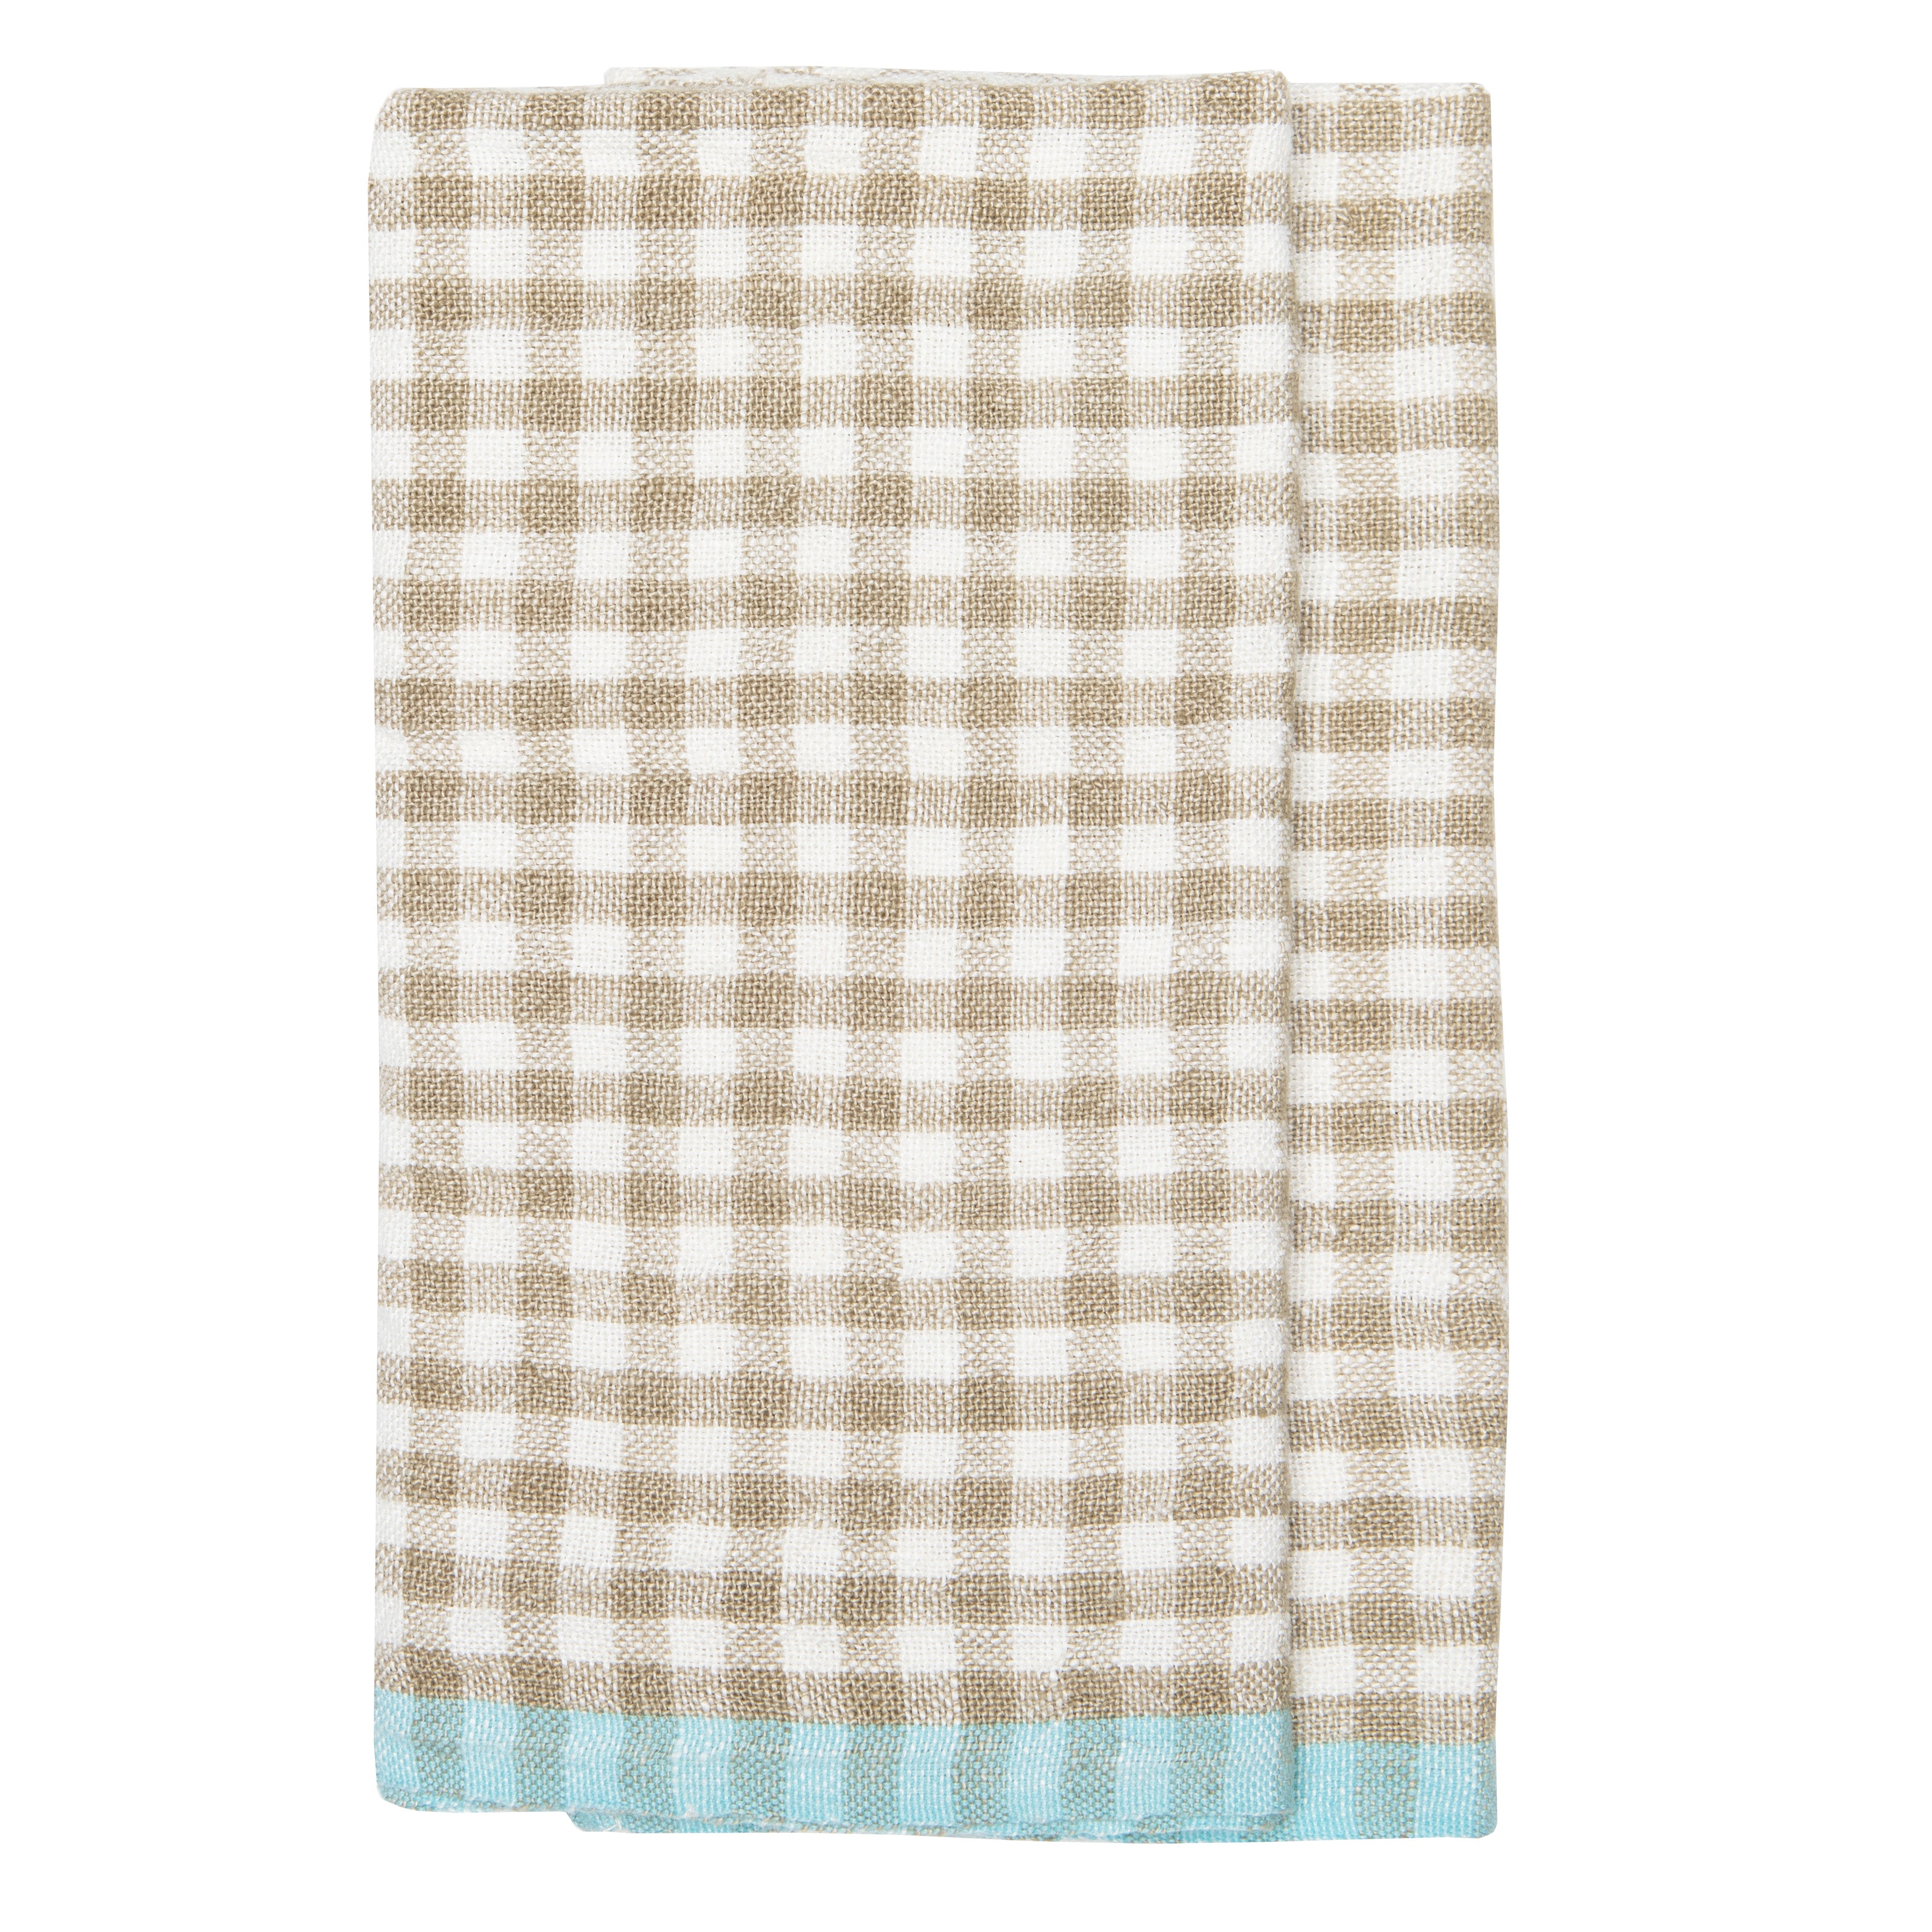 Two-Tone Gingham Towels, Set of 2